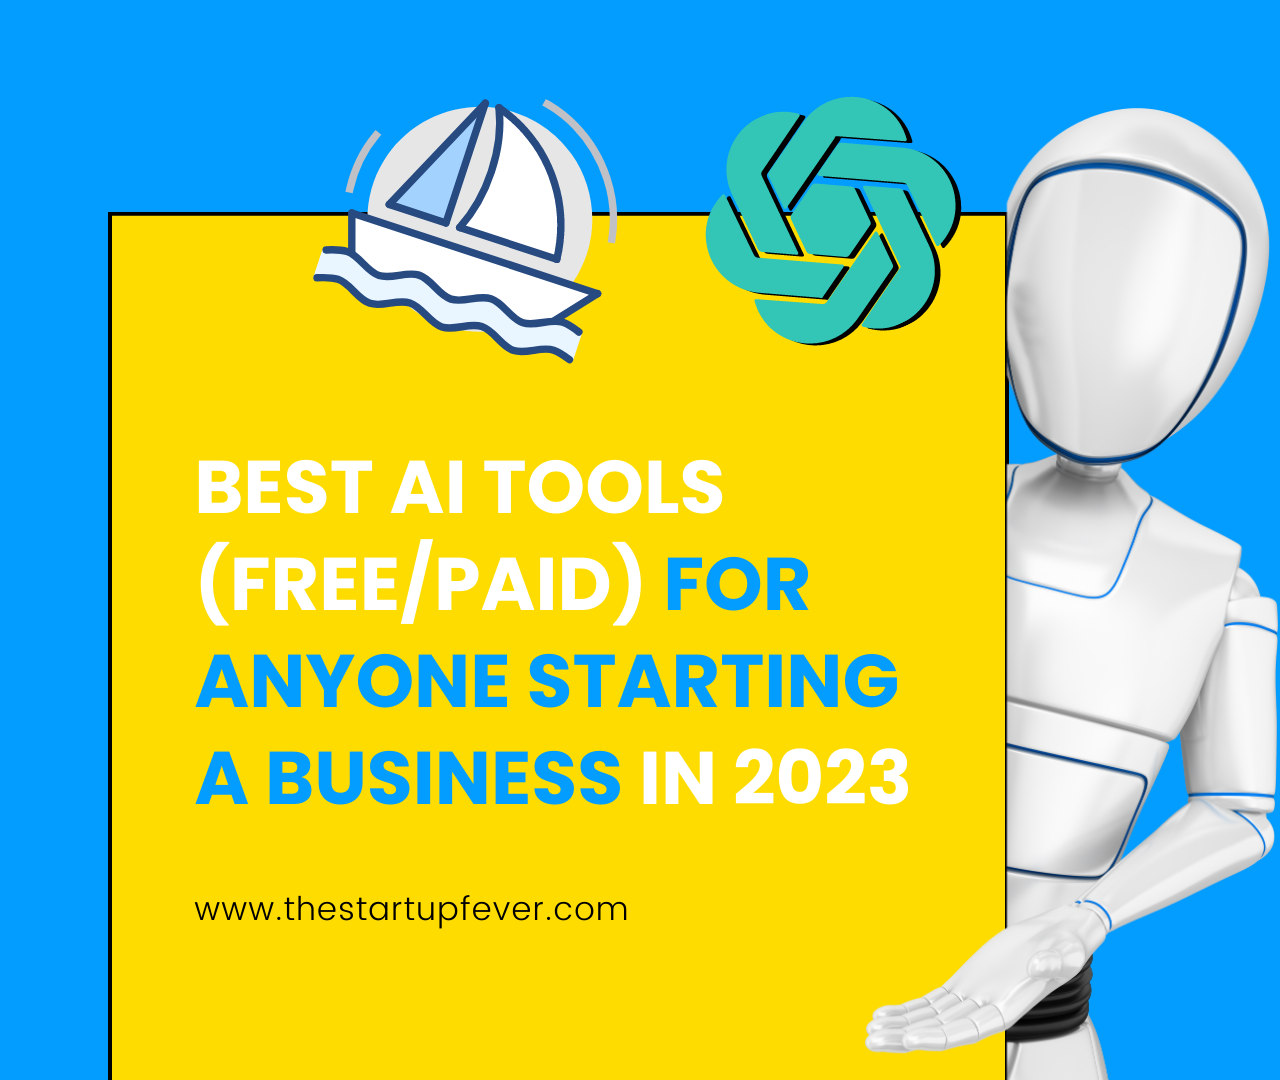 Best AI tools in 2023 (Free/Paid) for anyone starting a business